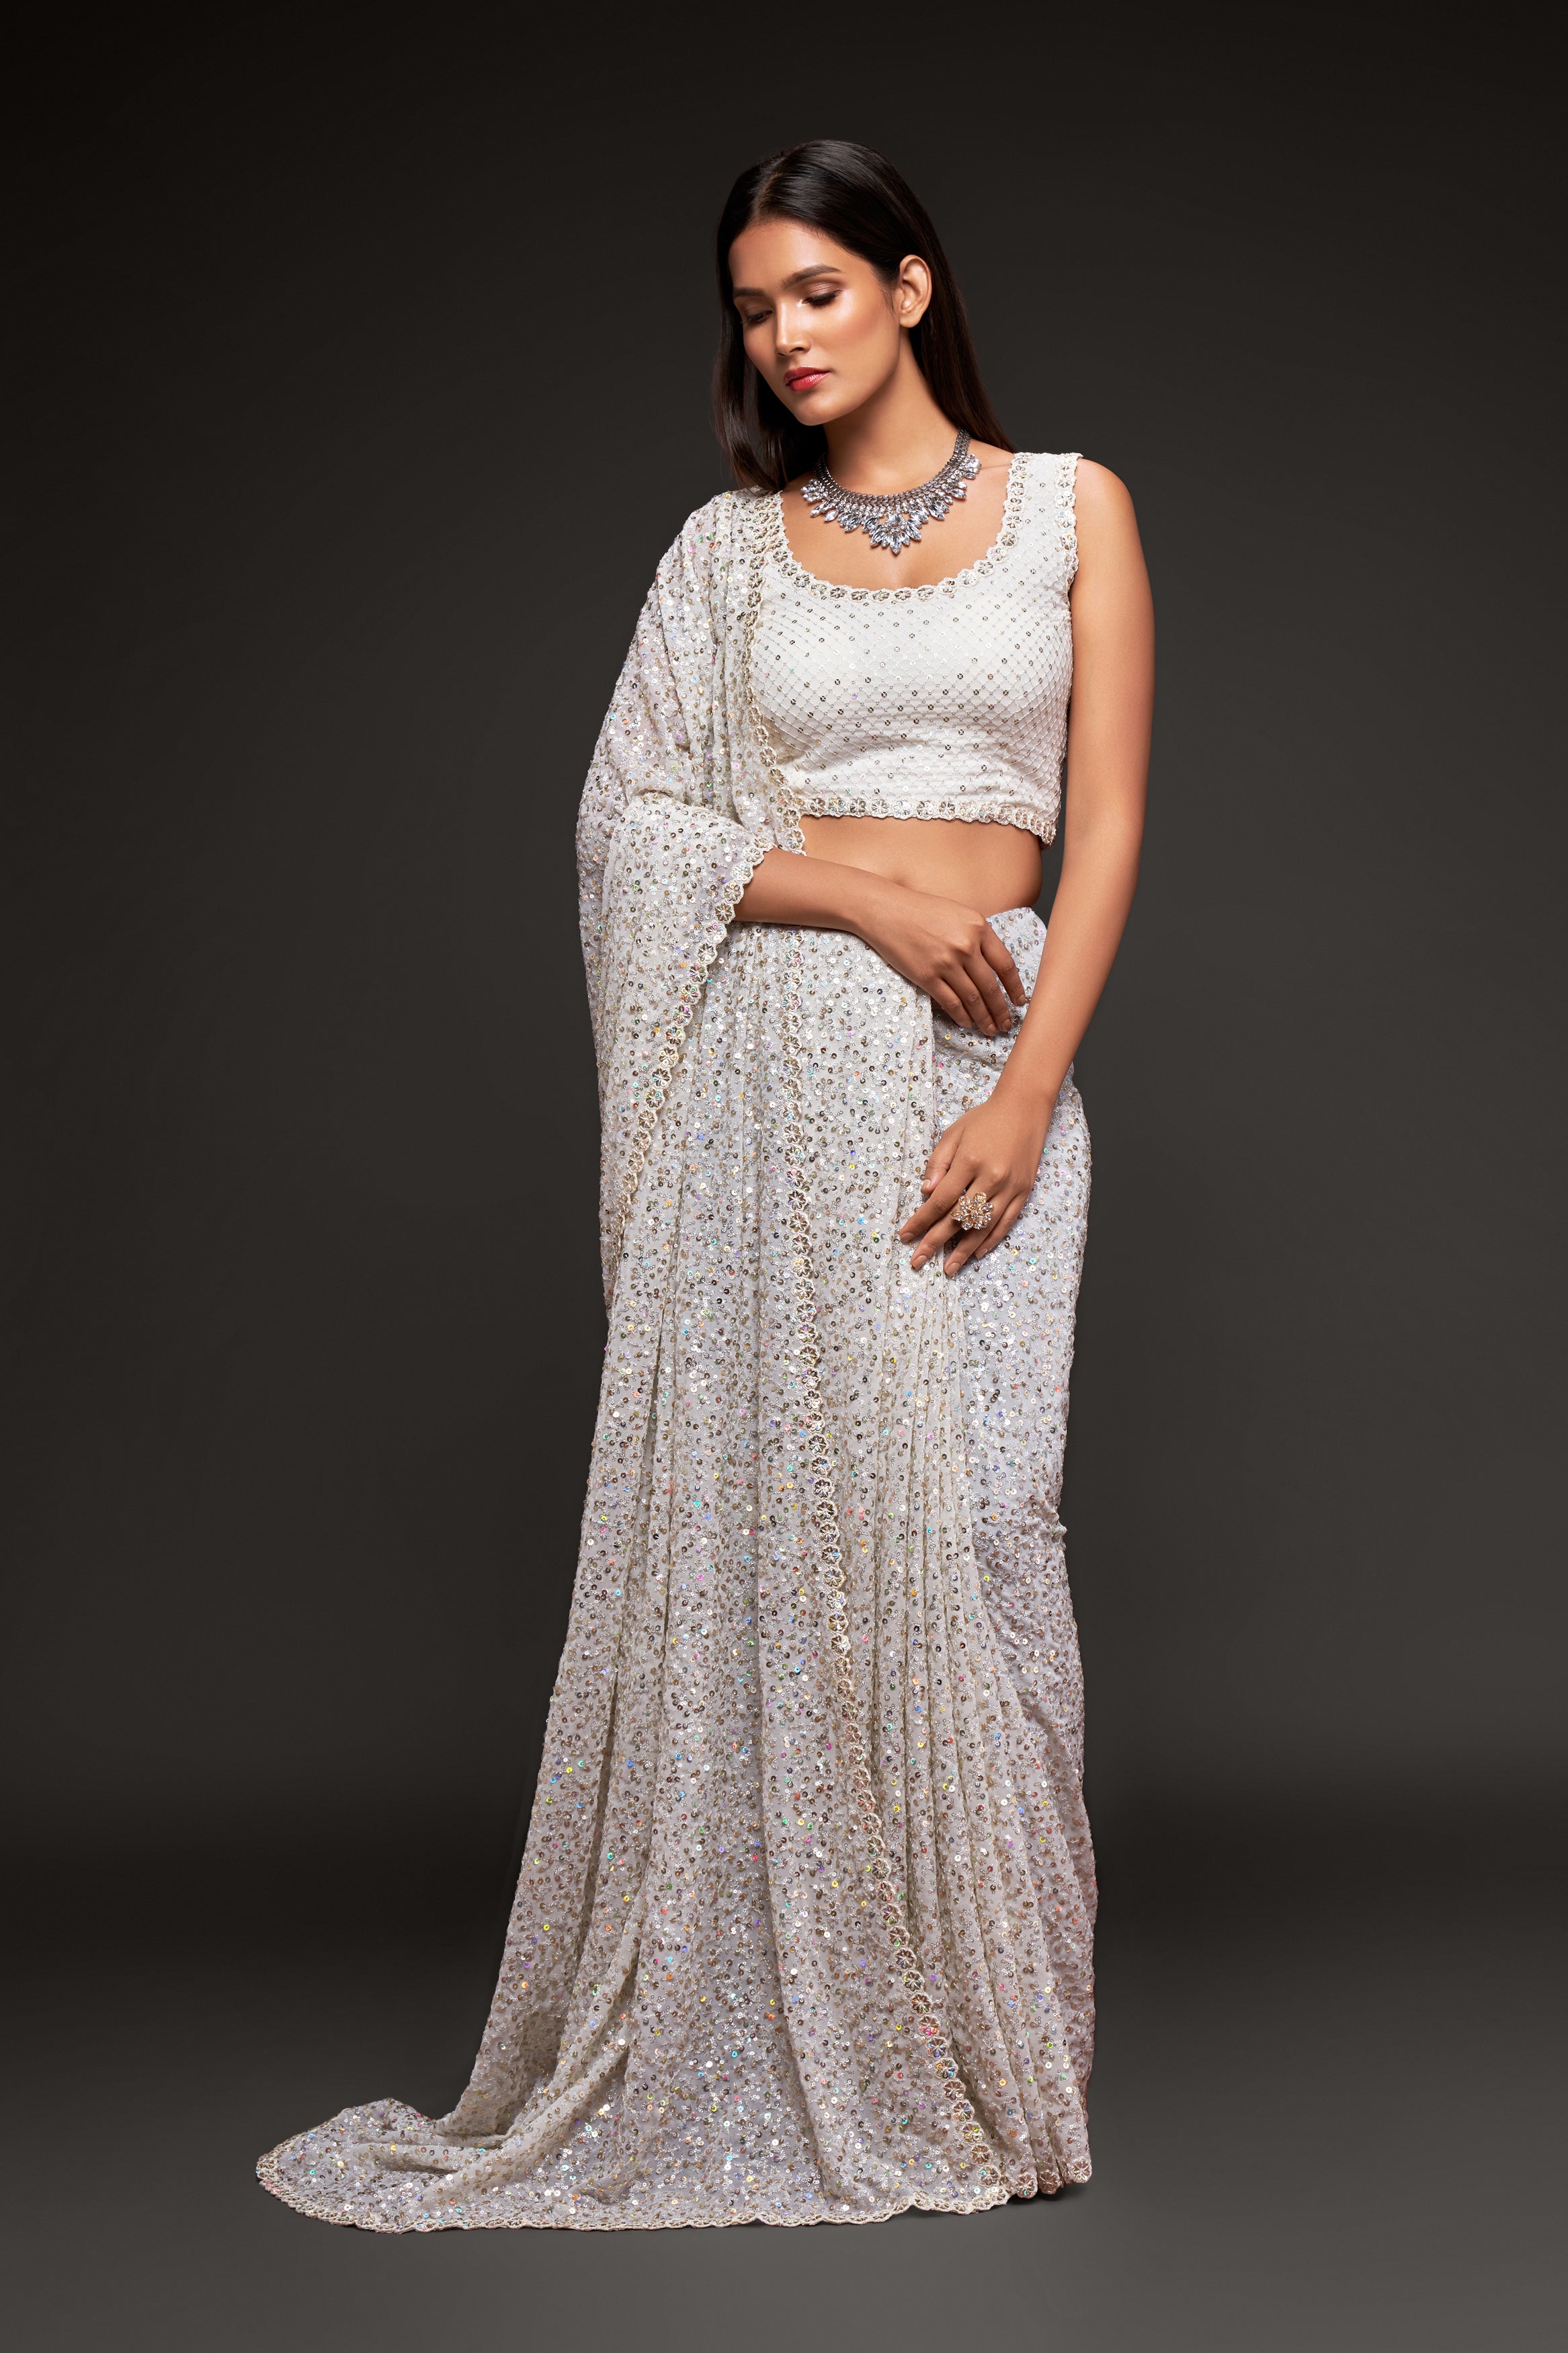 Pearl White Color Pure Georgette Sequin work Saree - Sakina  Collection YF#18729 - YellowFashion.in by Ozone Shield